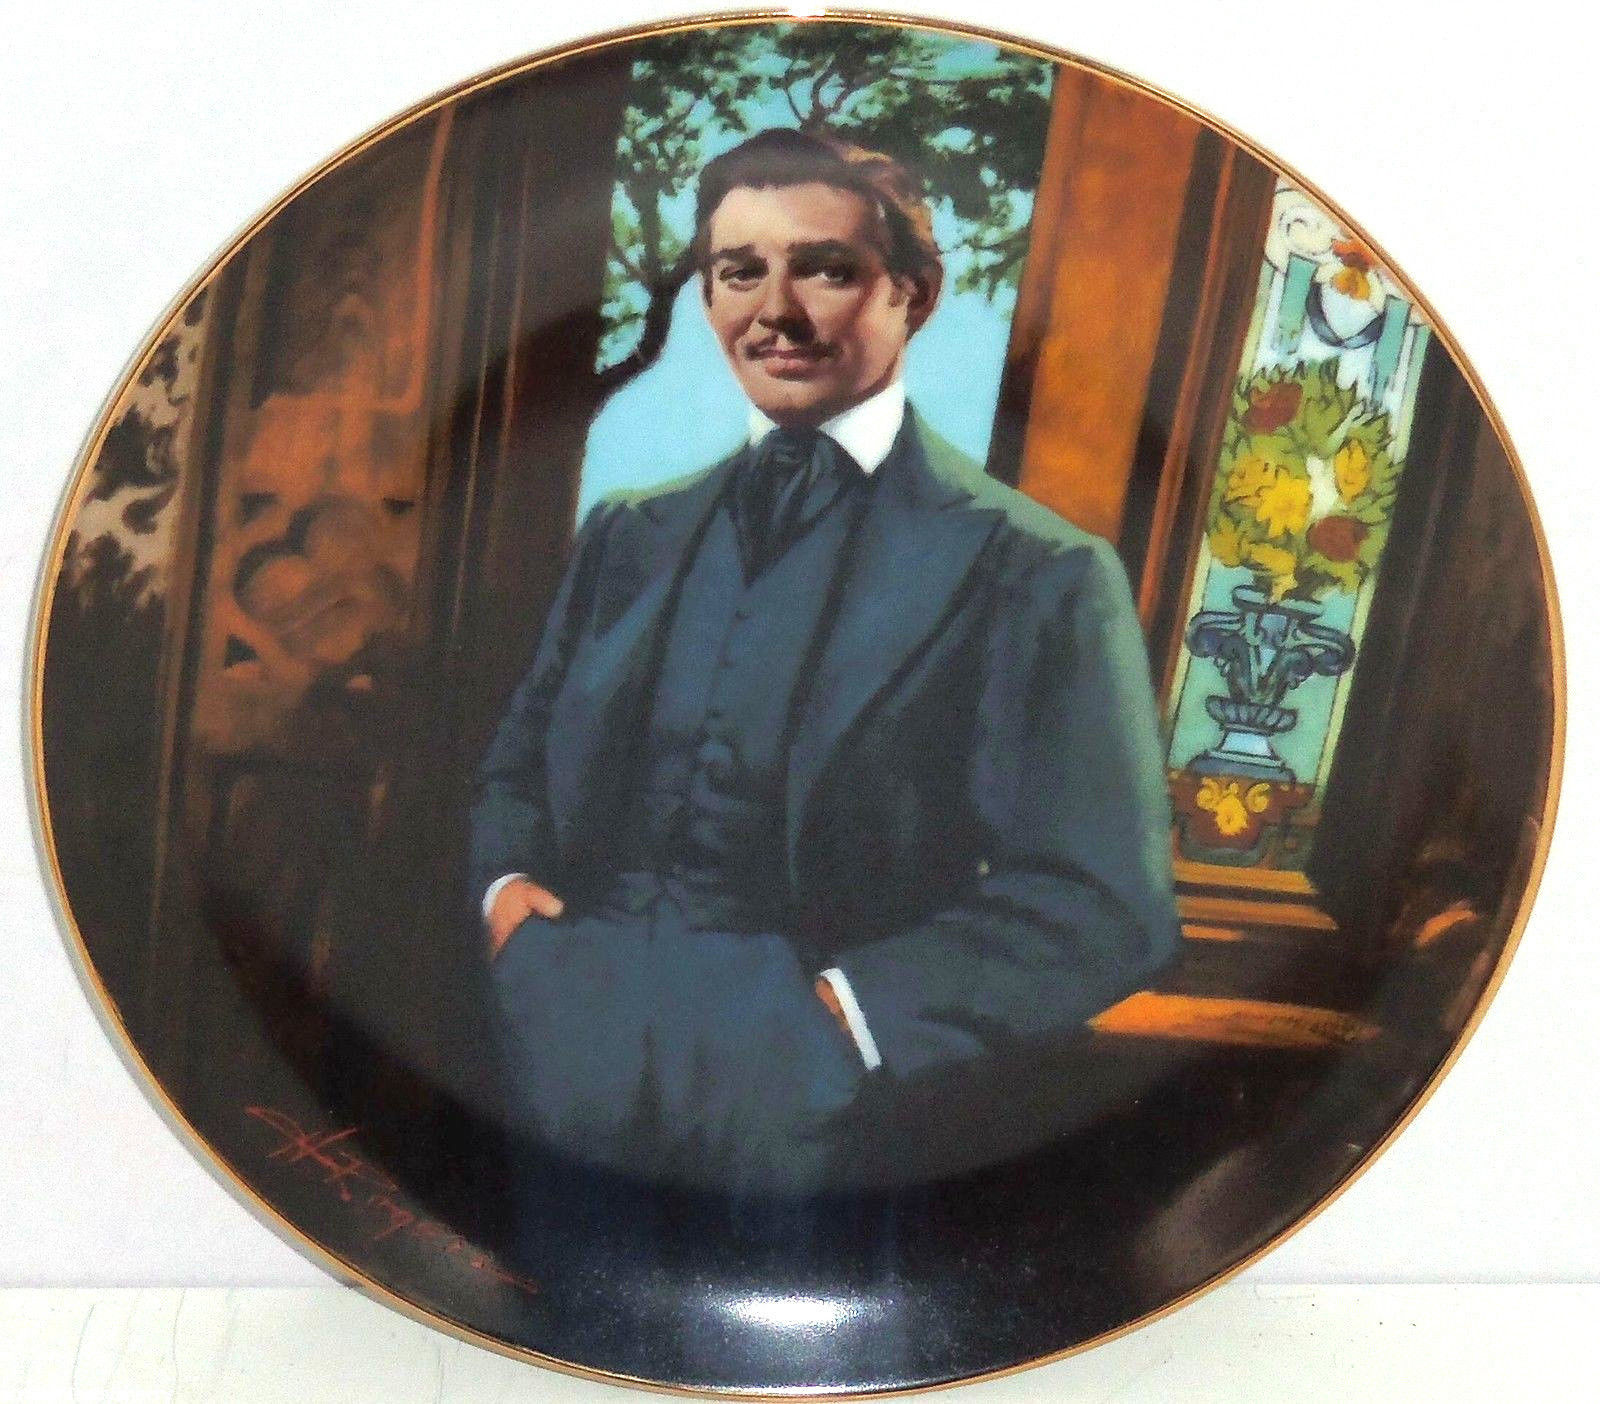 Gone with the Wind Collectors Plate Frankly My Dear Bradford Exchange Vintage - $49.95